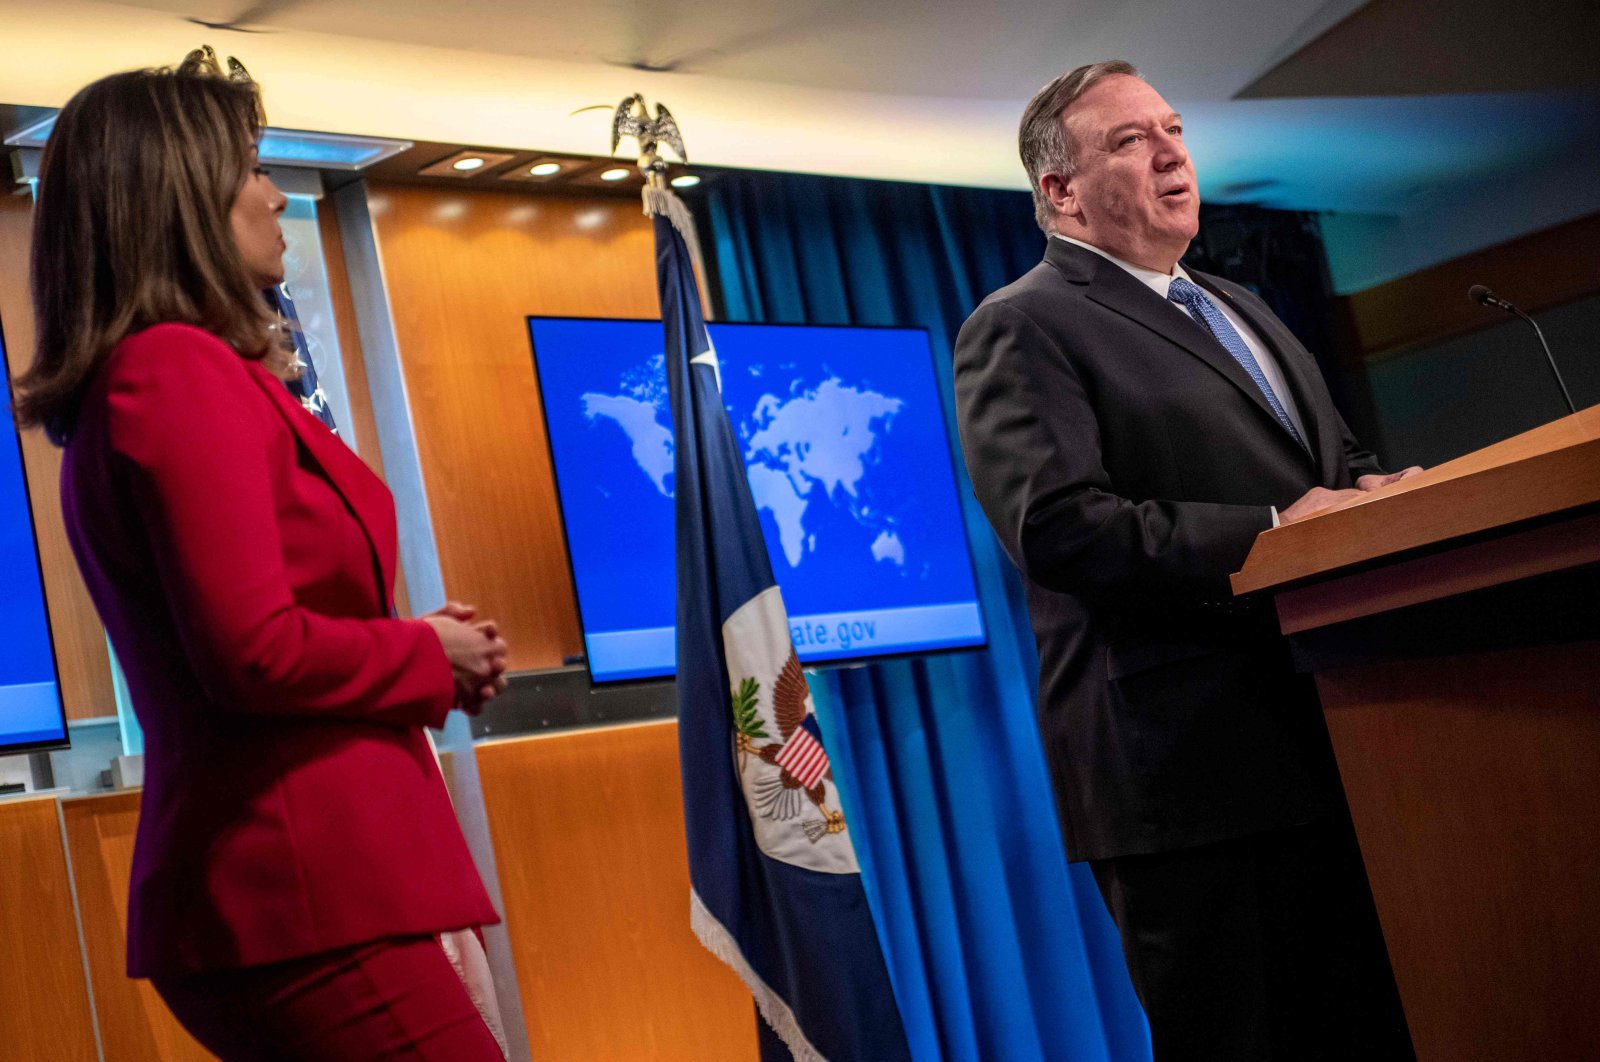 U.S. Secretary of State Mike Pompeo delivers remarks to the media, in the Press Briefing Room, at the Department of State in March 5, 2020 in Washington D.C. (AFP Photo)